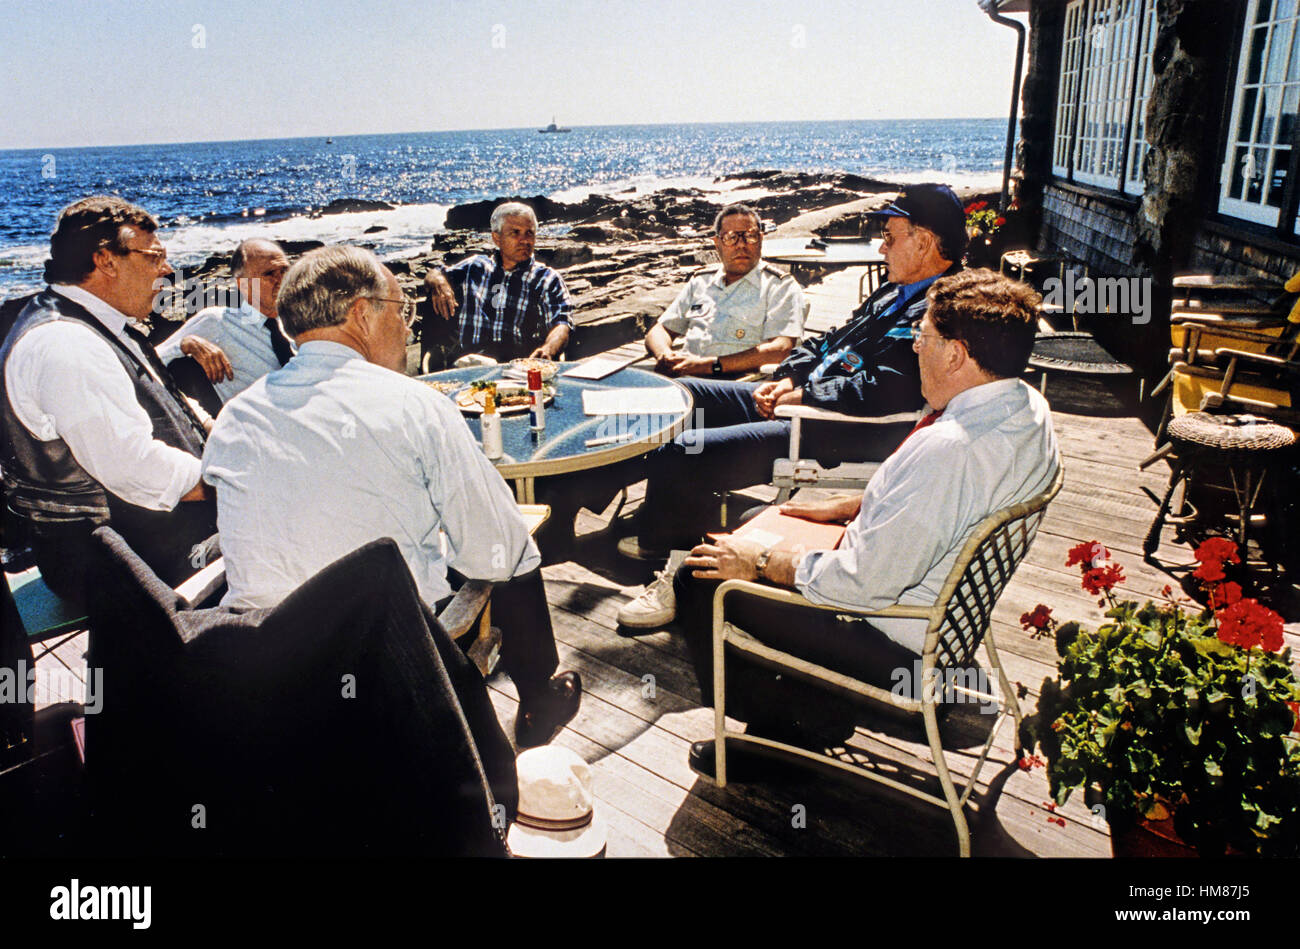 United States President George H.W. Bush meets with senior national security advisors on sending U.S. Troops to Saudi Arabia at his home at Walkers Point in Kennebunkport, Maine August 22, 1990. Mandatory Stock Photo